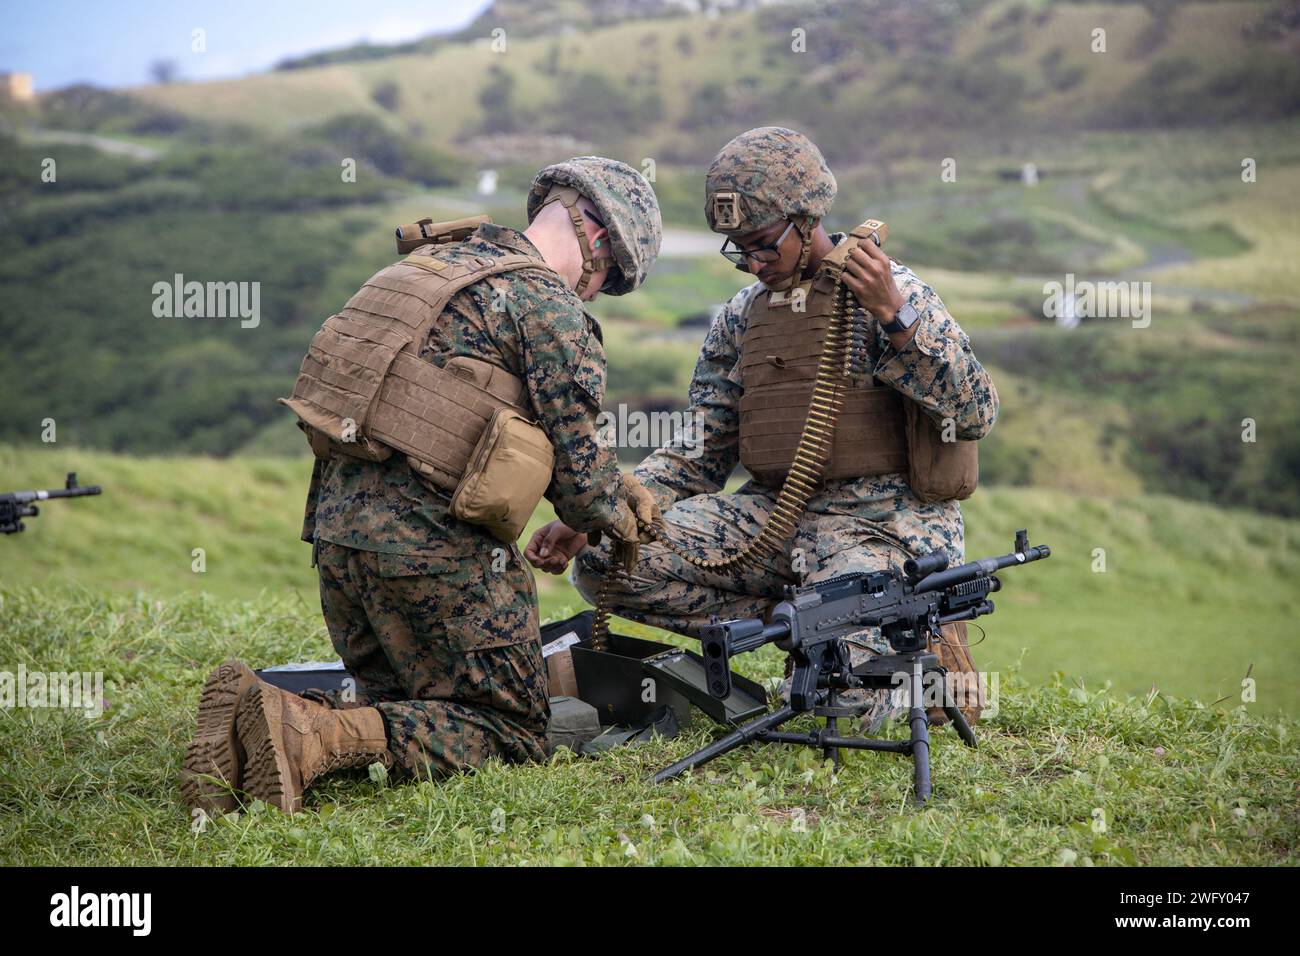 U.S. Marines with Marine Wing Support Squadron (MWSS) 174, Marine Aircraft Group 24, 1st Marine Aircraft Wing, prepare to fire M240-B and M2 .50-caliber machine guns at the Marine Corps Air Station Kaneohe Bay range, Hawaii, Jan. 16, 2024. The training provided an opportunity for Marines with MWSS-174 to get hands-on training and familiarization with the employment of crew-served weapons. Stock Photo